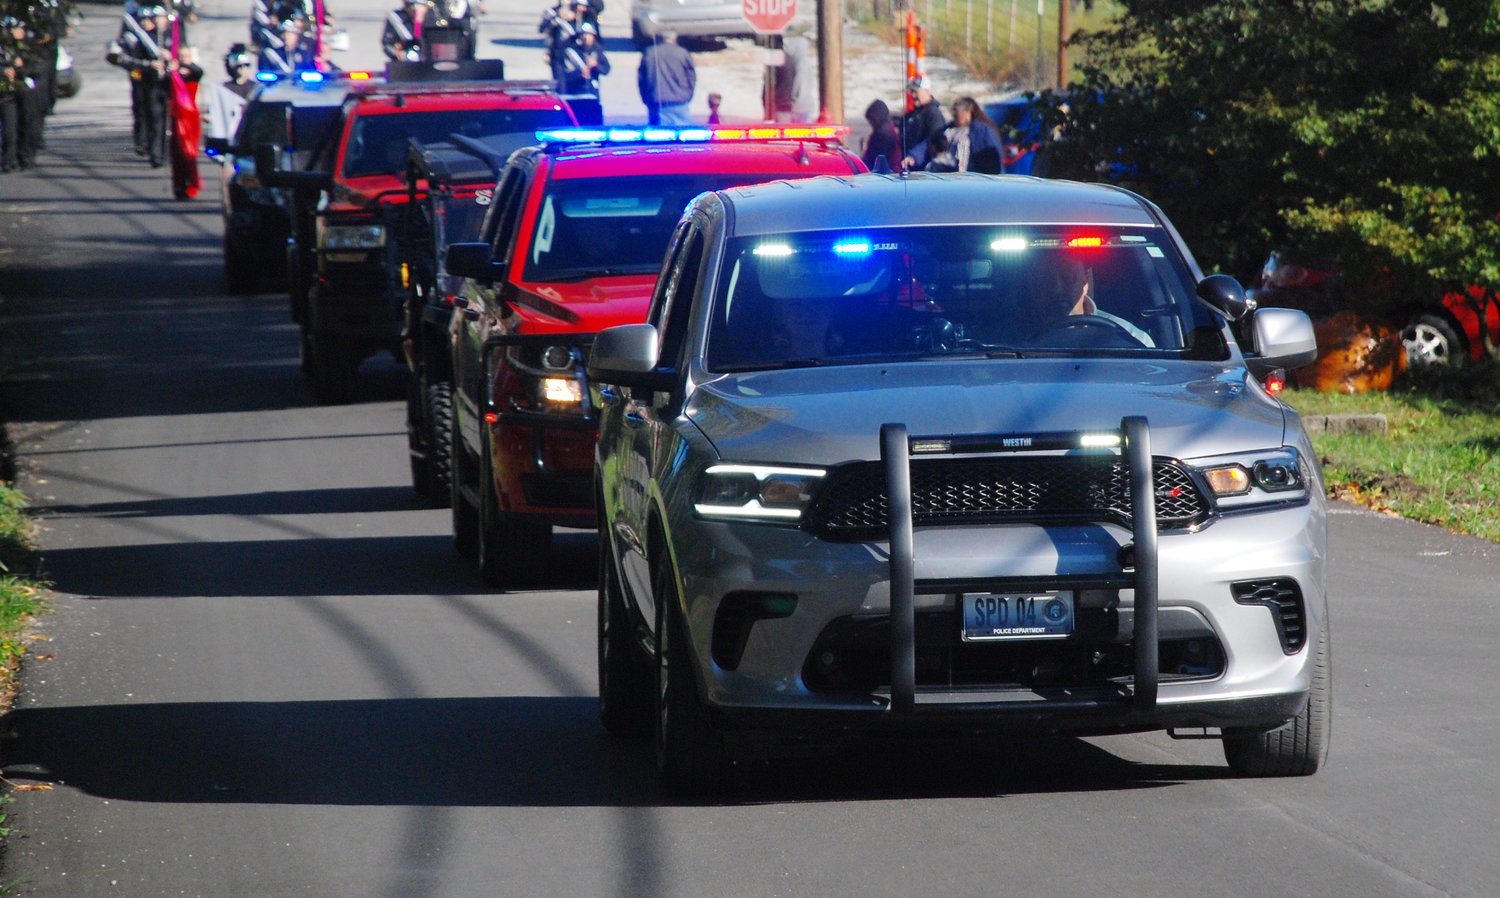 SPARTA POLICE CHIEF TRAMPUS TAYLOR led the convoy of parade vehicles in the 2021 Sparta Persimmon Days Parade.